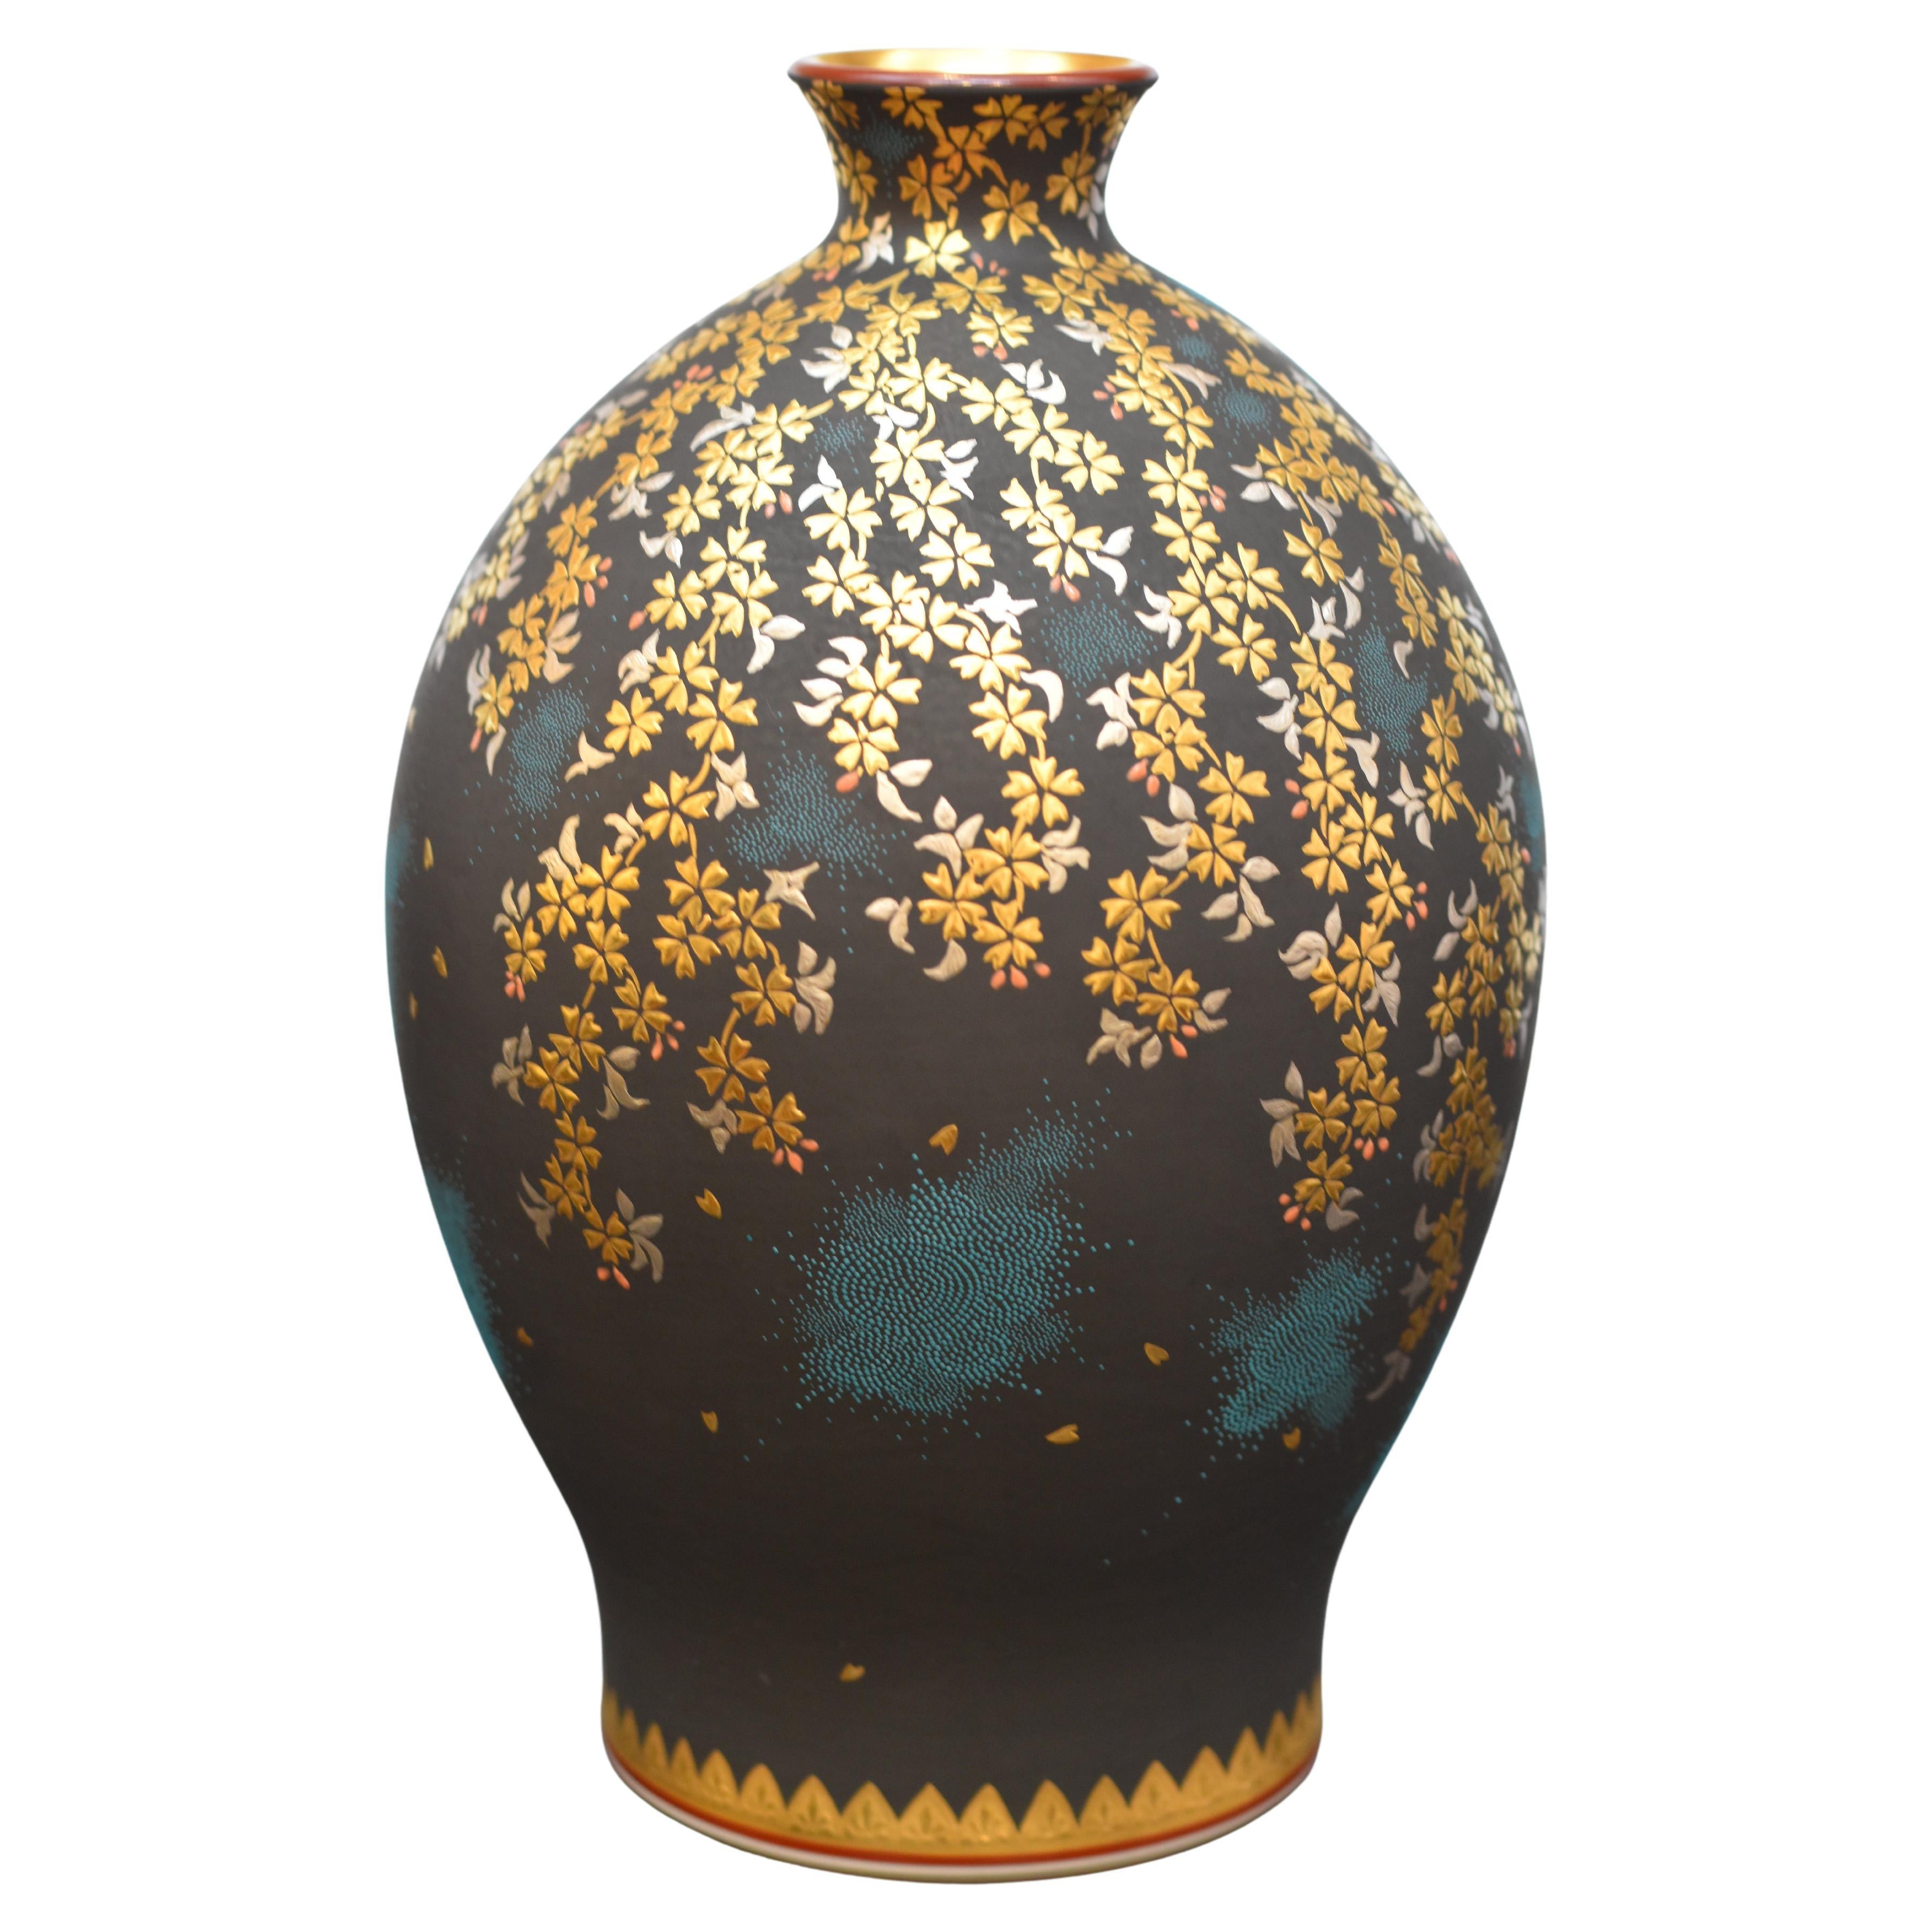 Exquisite museum quality signed Japanese contemporary porcelain vase,  a masterpiece by highly acclaimed award-winning third-generation porcelain artist of the Kutani region of Japan featuring a cascade of cherry blossoms rendered in pure gold and